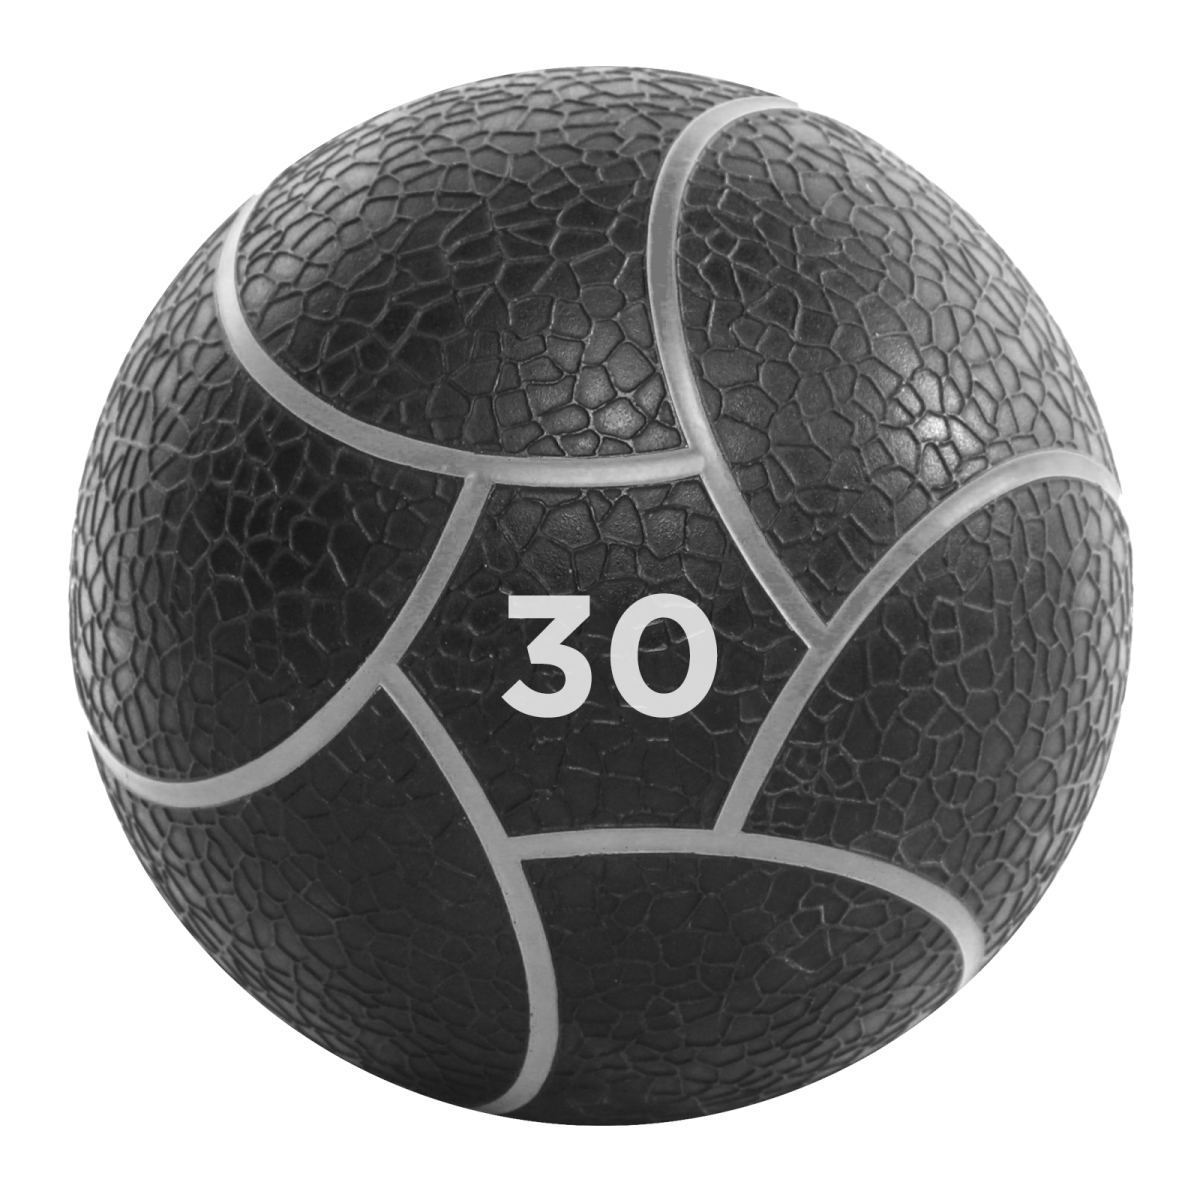 Picture of Power Systems 25730 Elite Power Med Ball Prime 30 lb. Gray